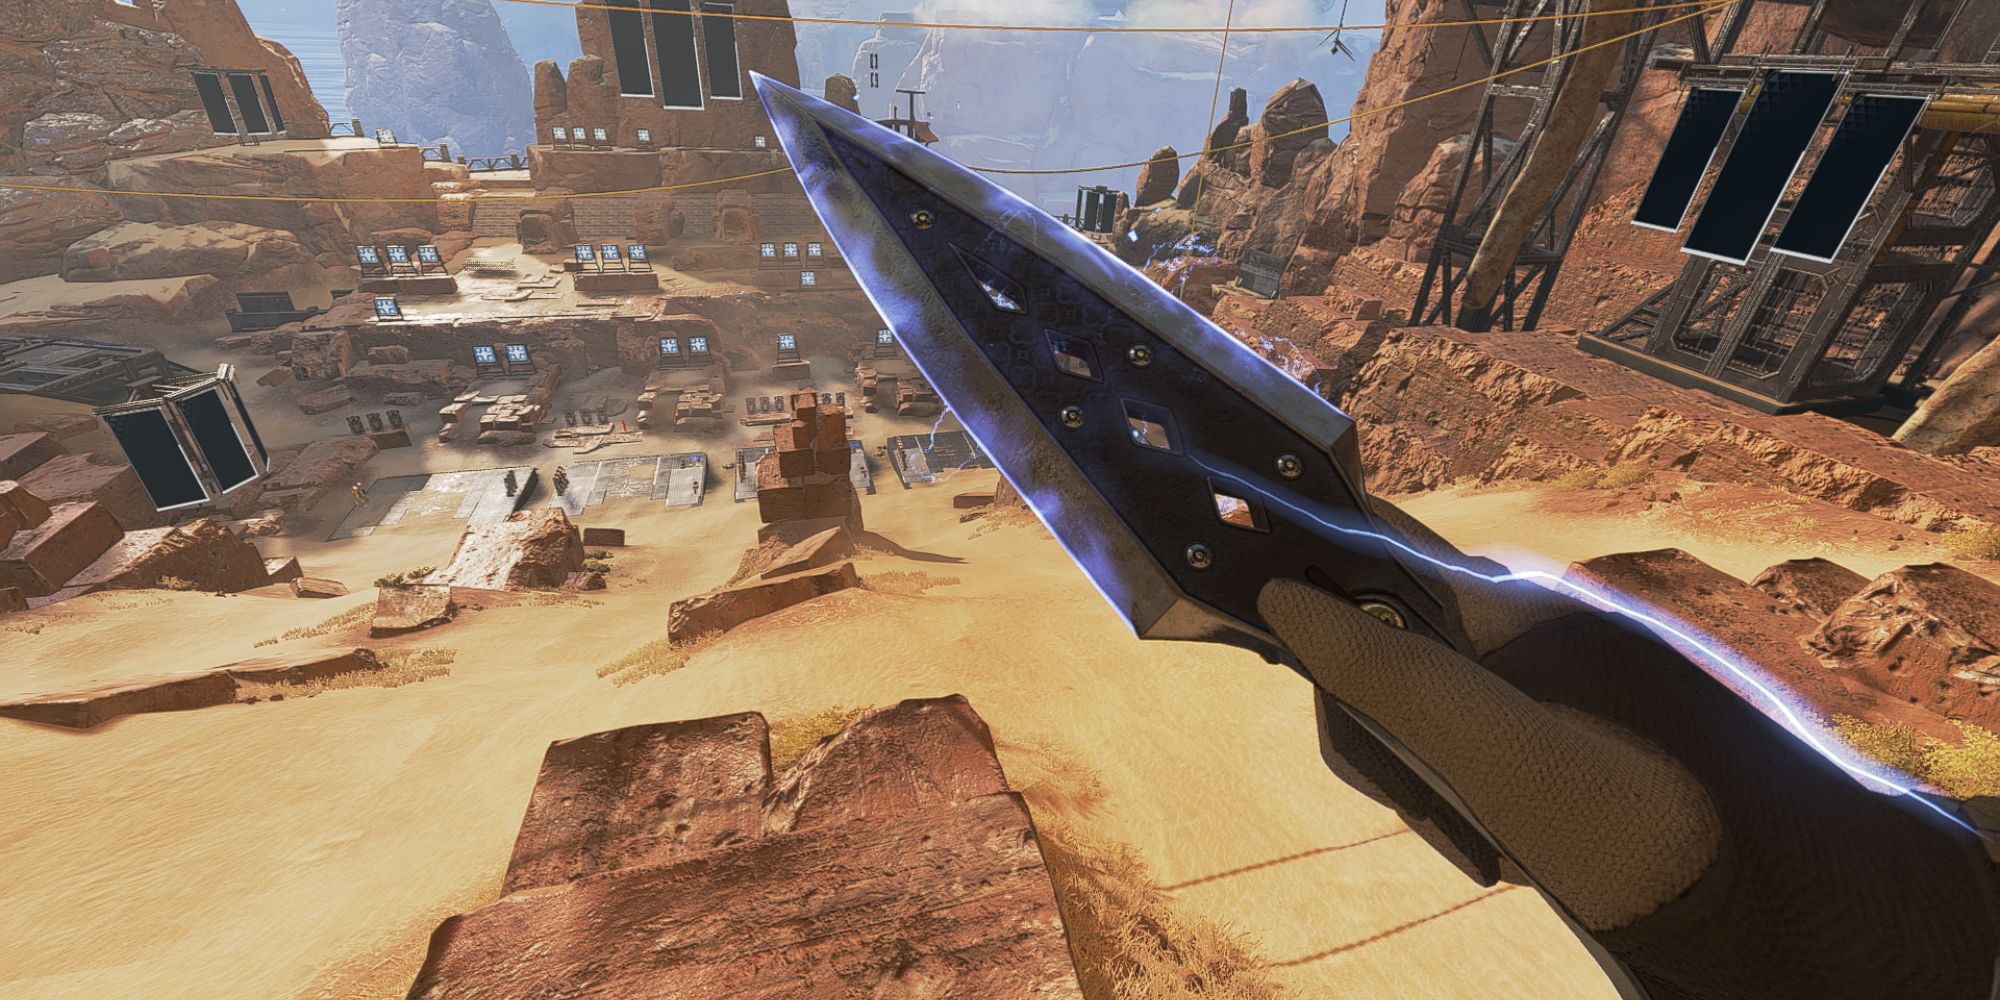 An image of Wraith's Heirloom from Apex Legends, a black and blue kunai knife. 